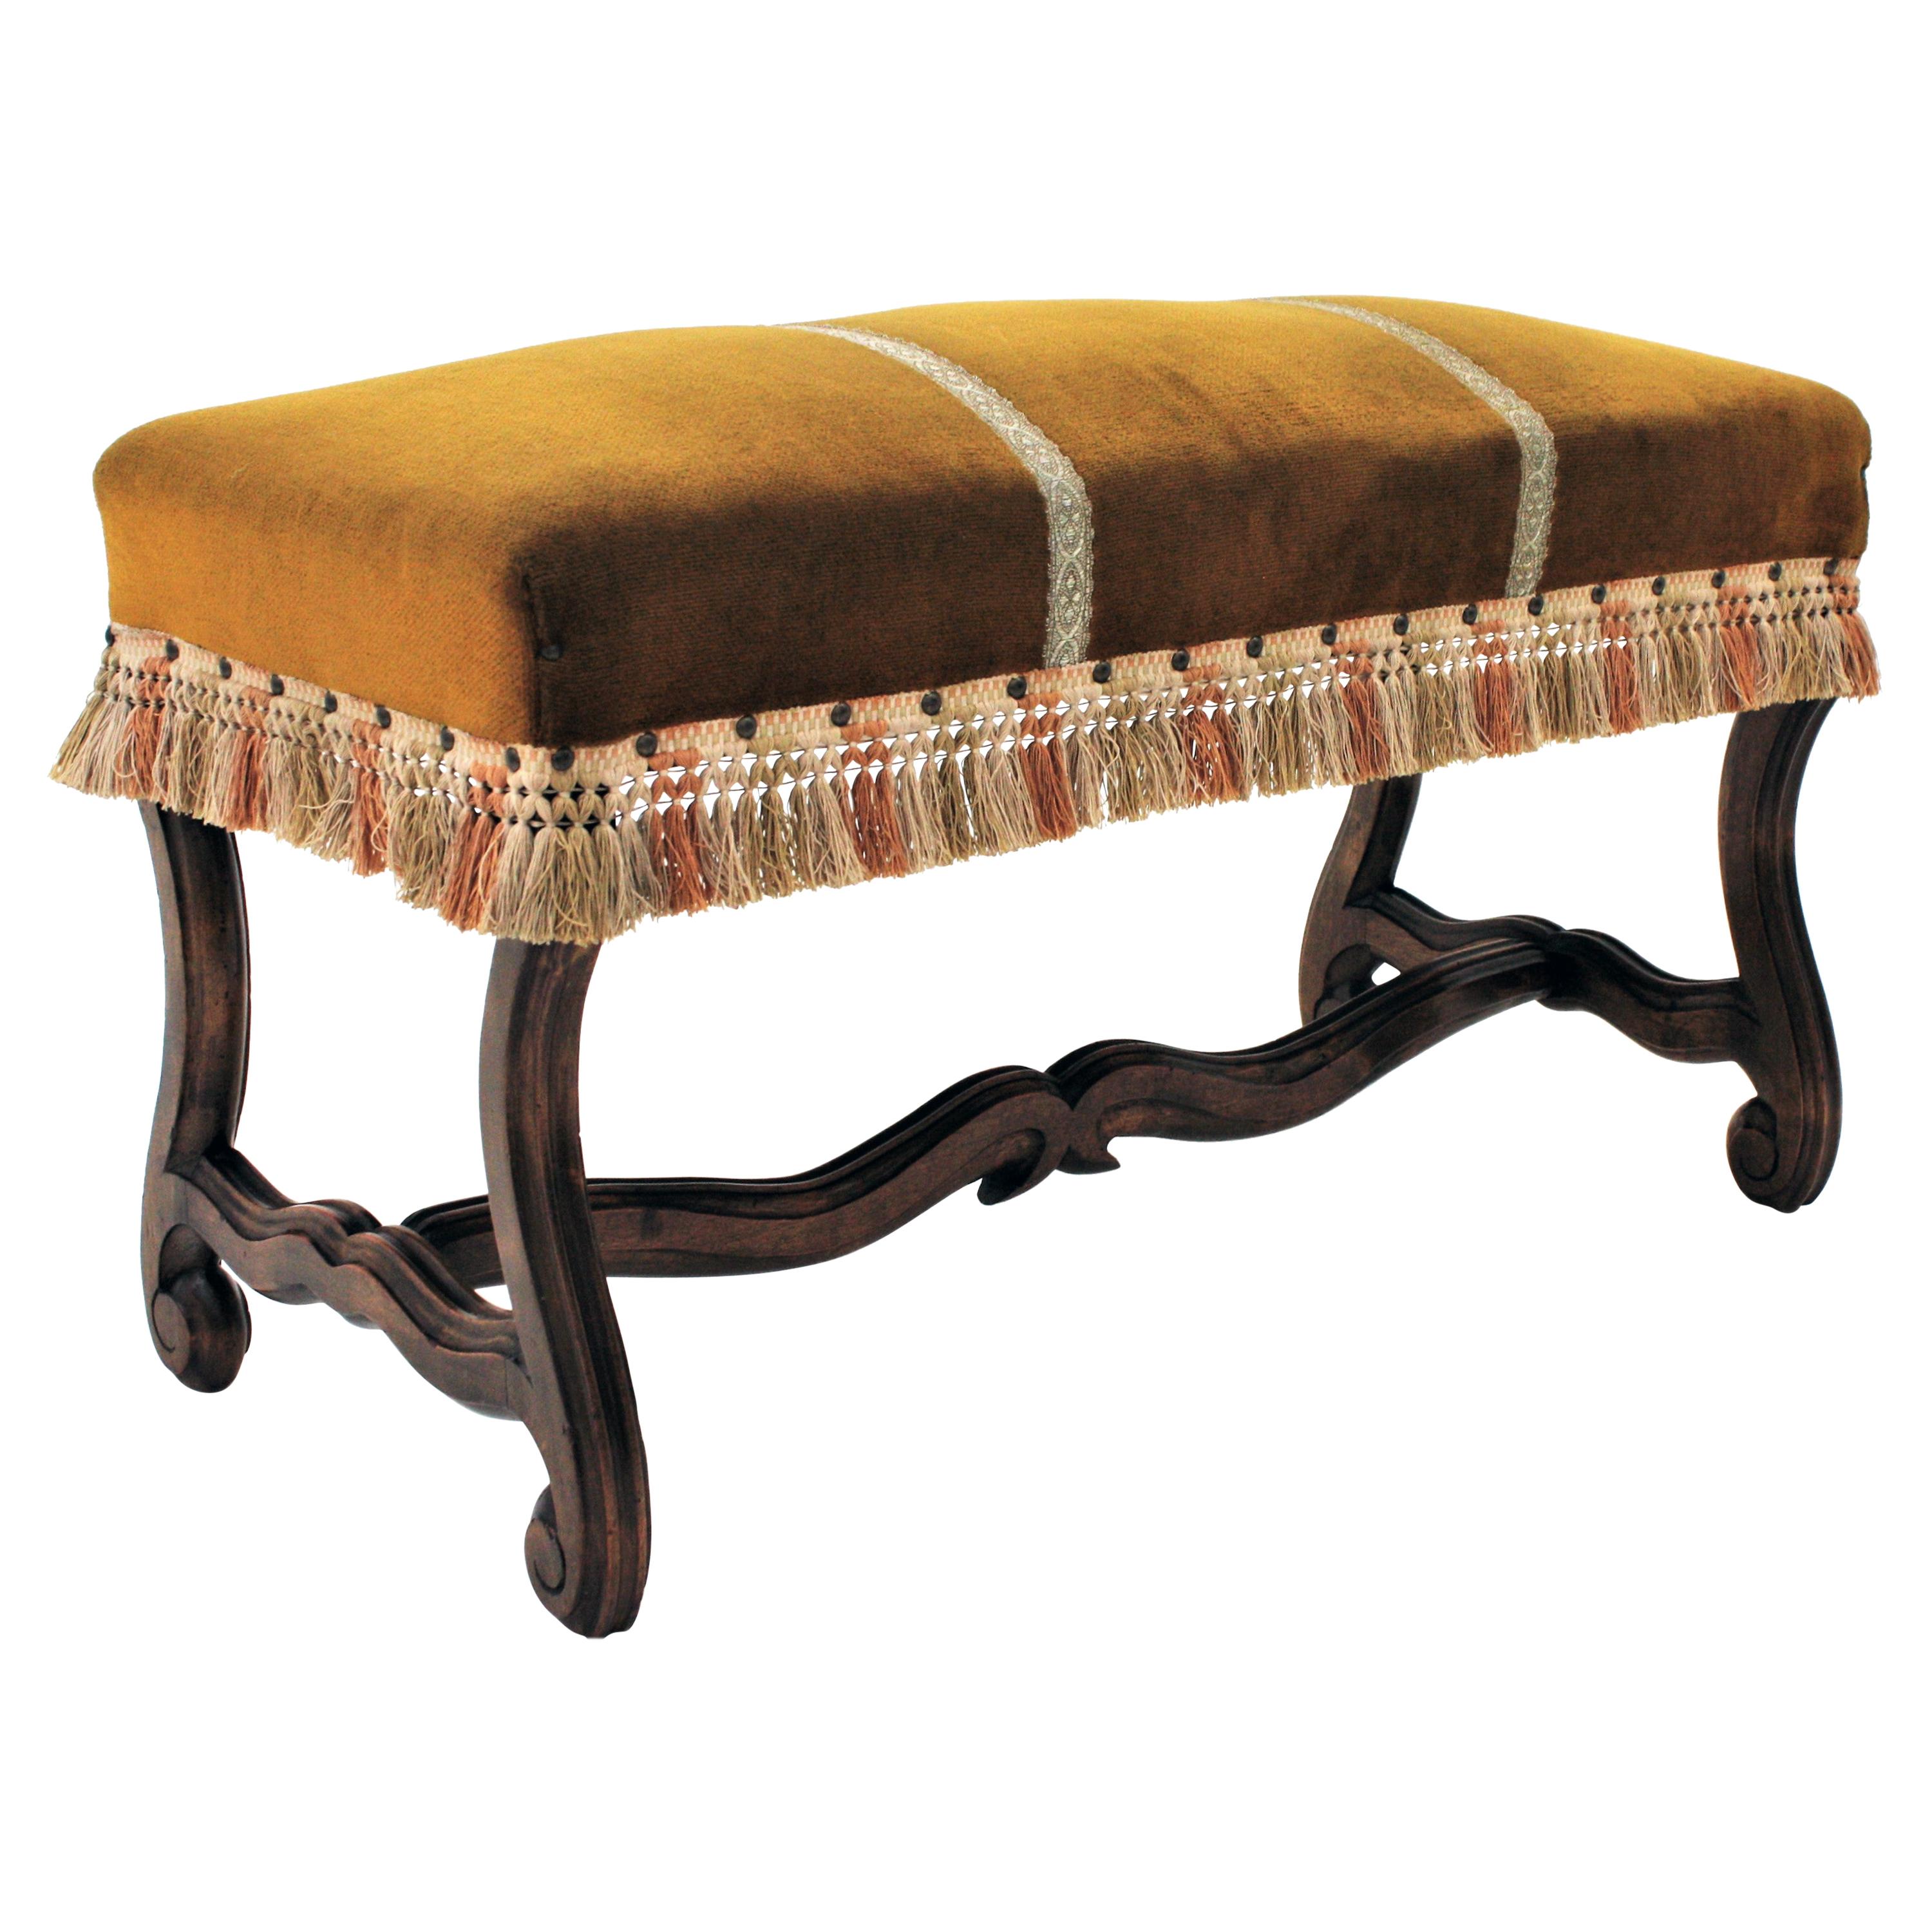 Louis XIV style Os de Mouton legs bench in velvet upholstery with Fringe, France, 1930s
An early 20th century backless Louis XIV style bench or stool raised on four Os de Mouton hand carved walnut wood legs with stretcher.
This stylish banquette